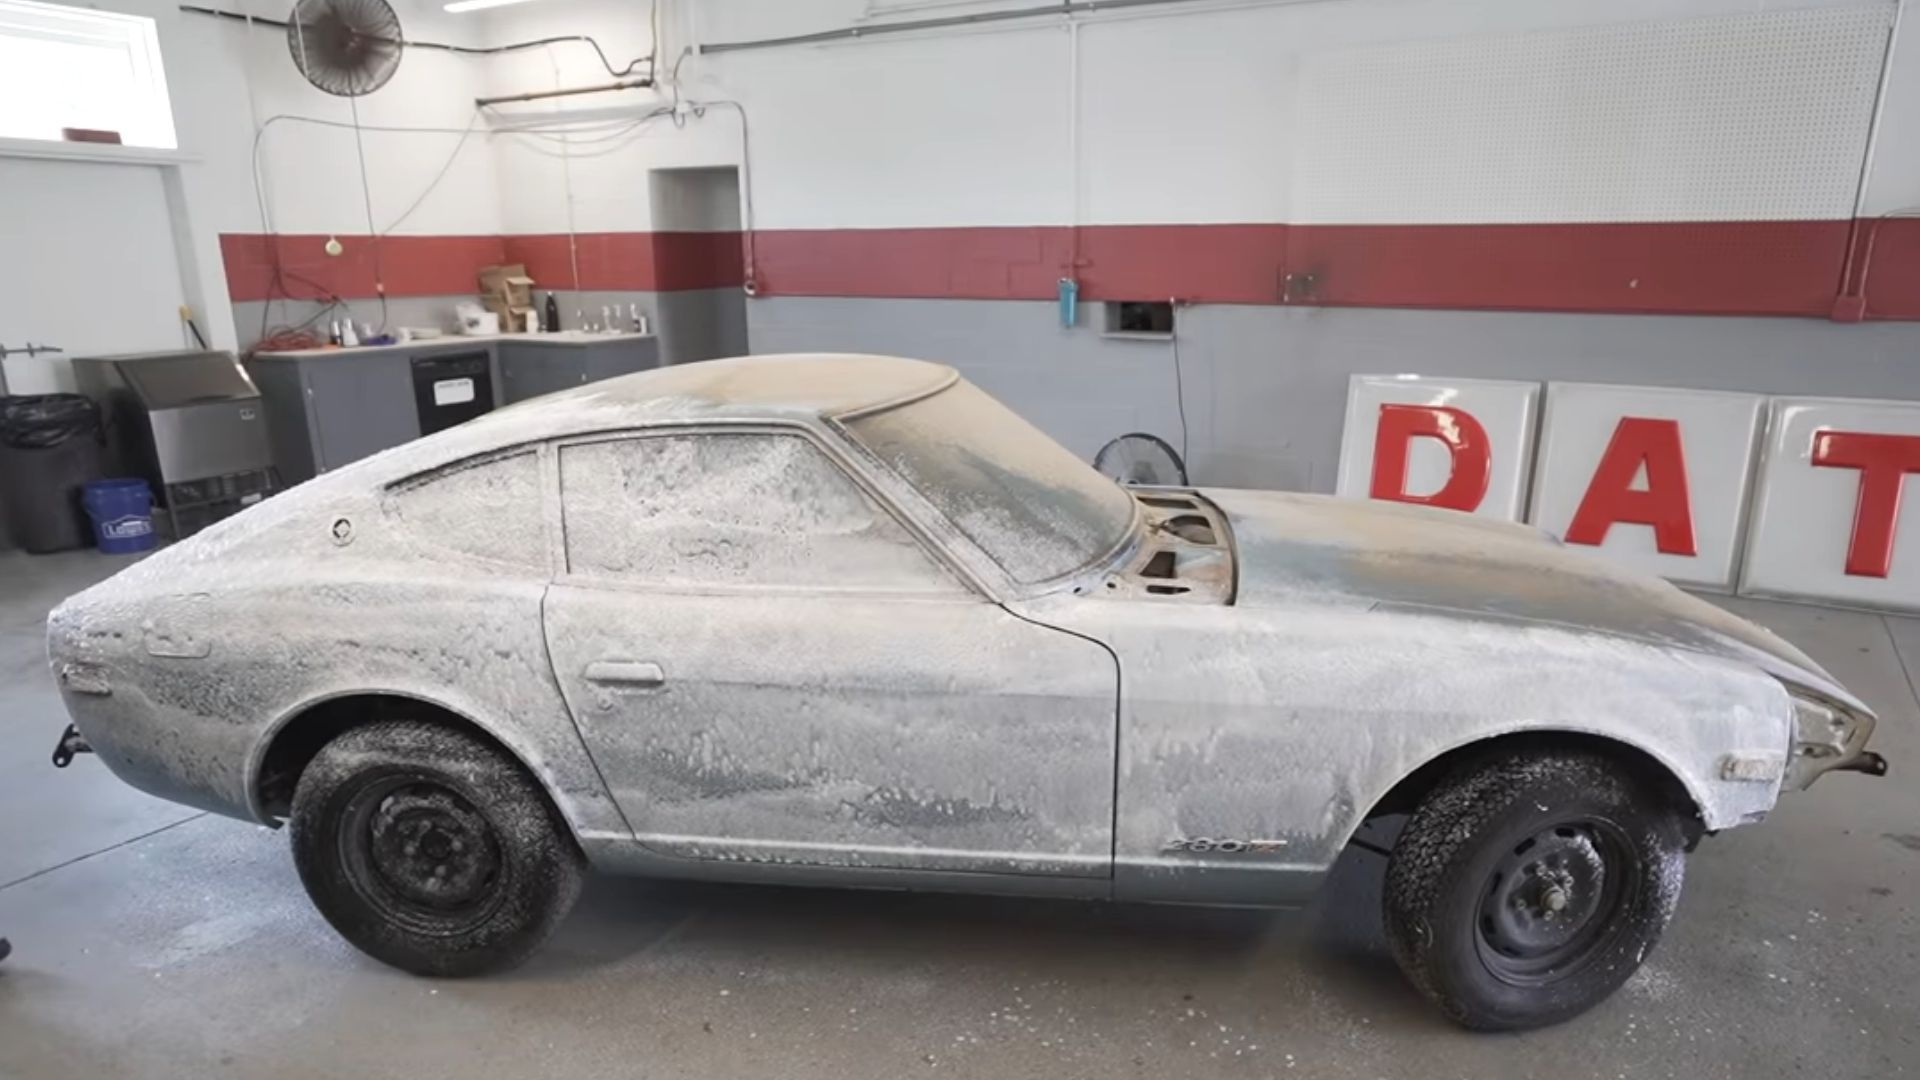 news, sports, american, newsletter, highlights, muscle, handpicked, client, classic, modern classic, europe, features, luxury, trucks, celebrity, off-road, german, watch a datsun 280z’s first bath in 44 years